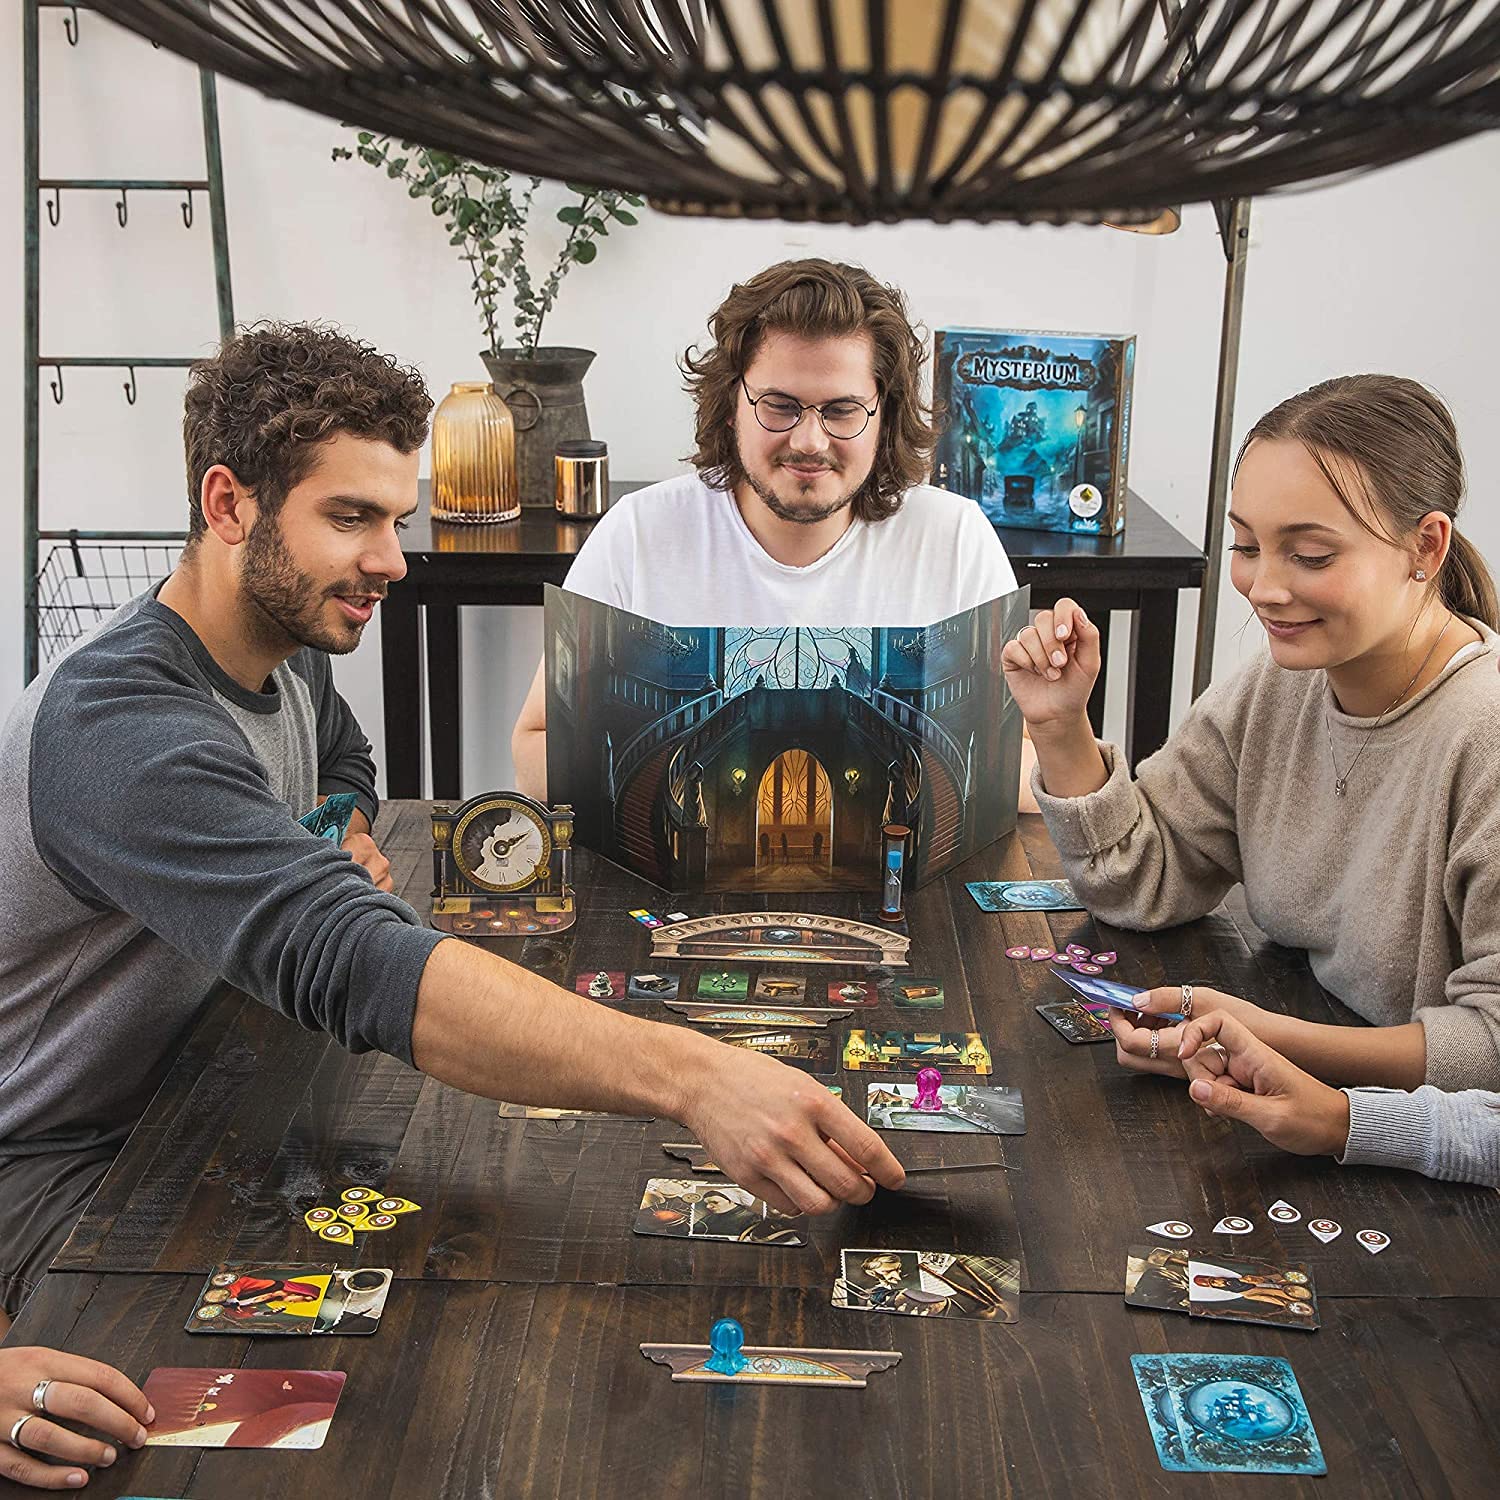 Libellud Mysterium Hidden Signs Board Game Expansion - Enigmatic Cooperative Mystery Game with Ghostly Intrigue, Fun for Family Game Night, Ages 10+, 2-7 Players, 45 Minute Playtime, Made